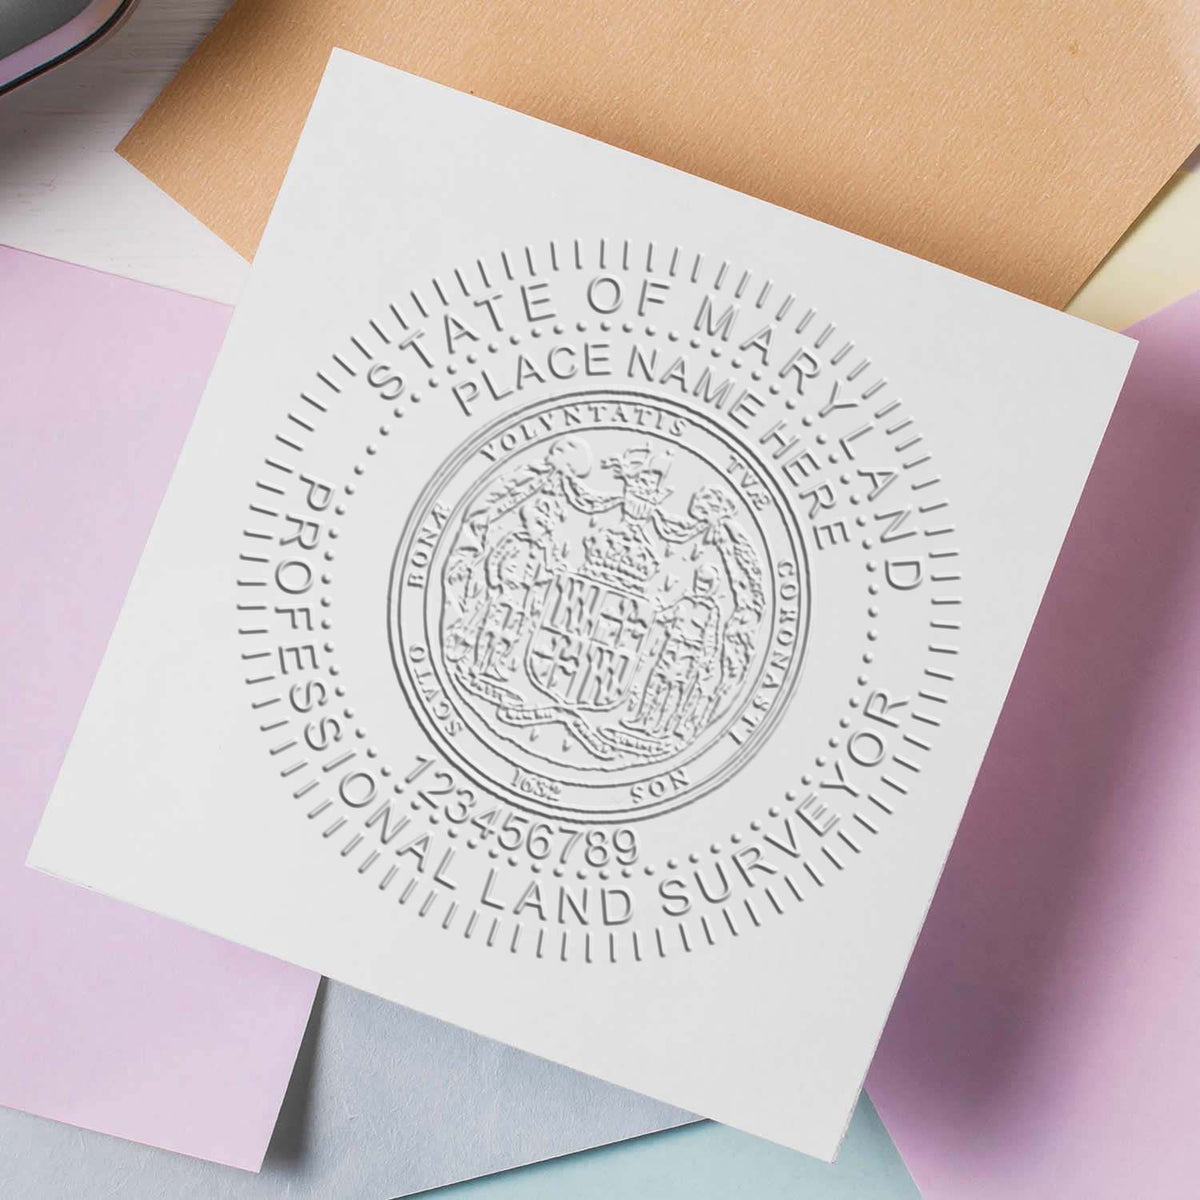 An in use photo of the Gift Maryland Land Surveyor Seal showing a sample imprint on a cardstock